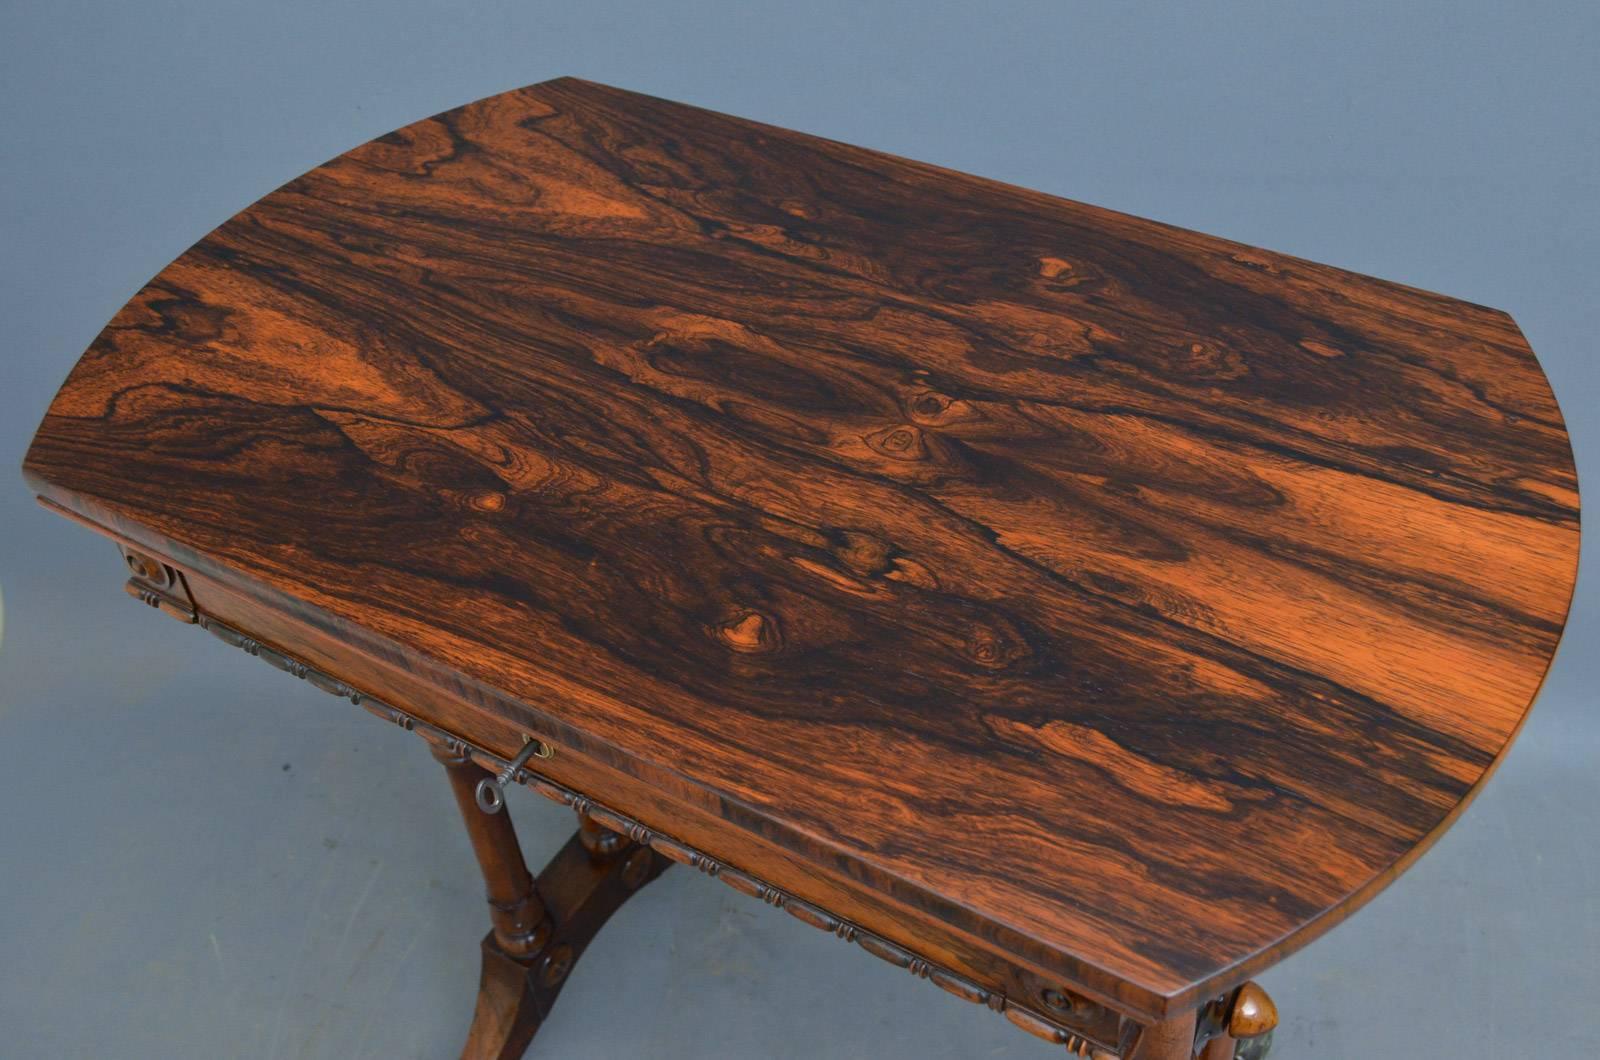 Sn4221 a Regency lamp table in rosewood, having shaped top above frieze drawers and turned and carved supports terminating in down swept legs and original brass castors. This antique table retains its original finish with some repolishing to the